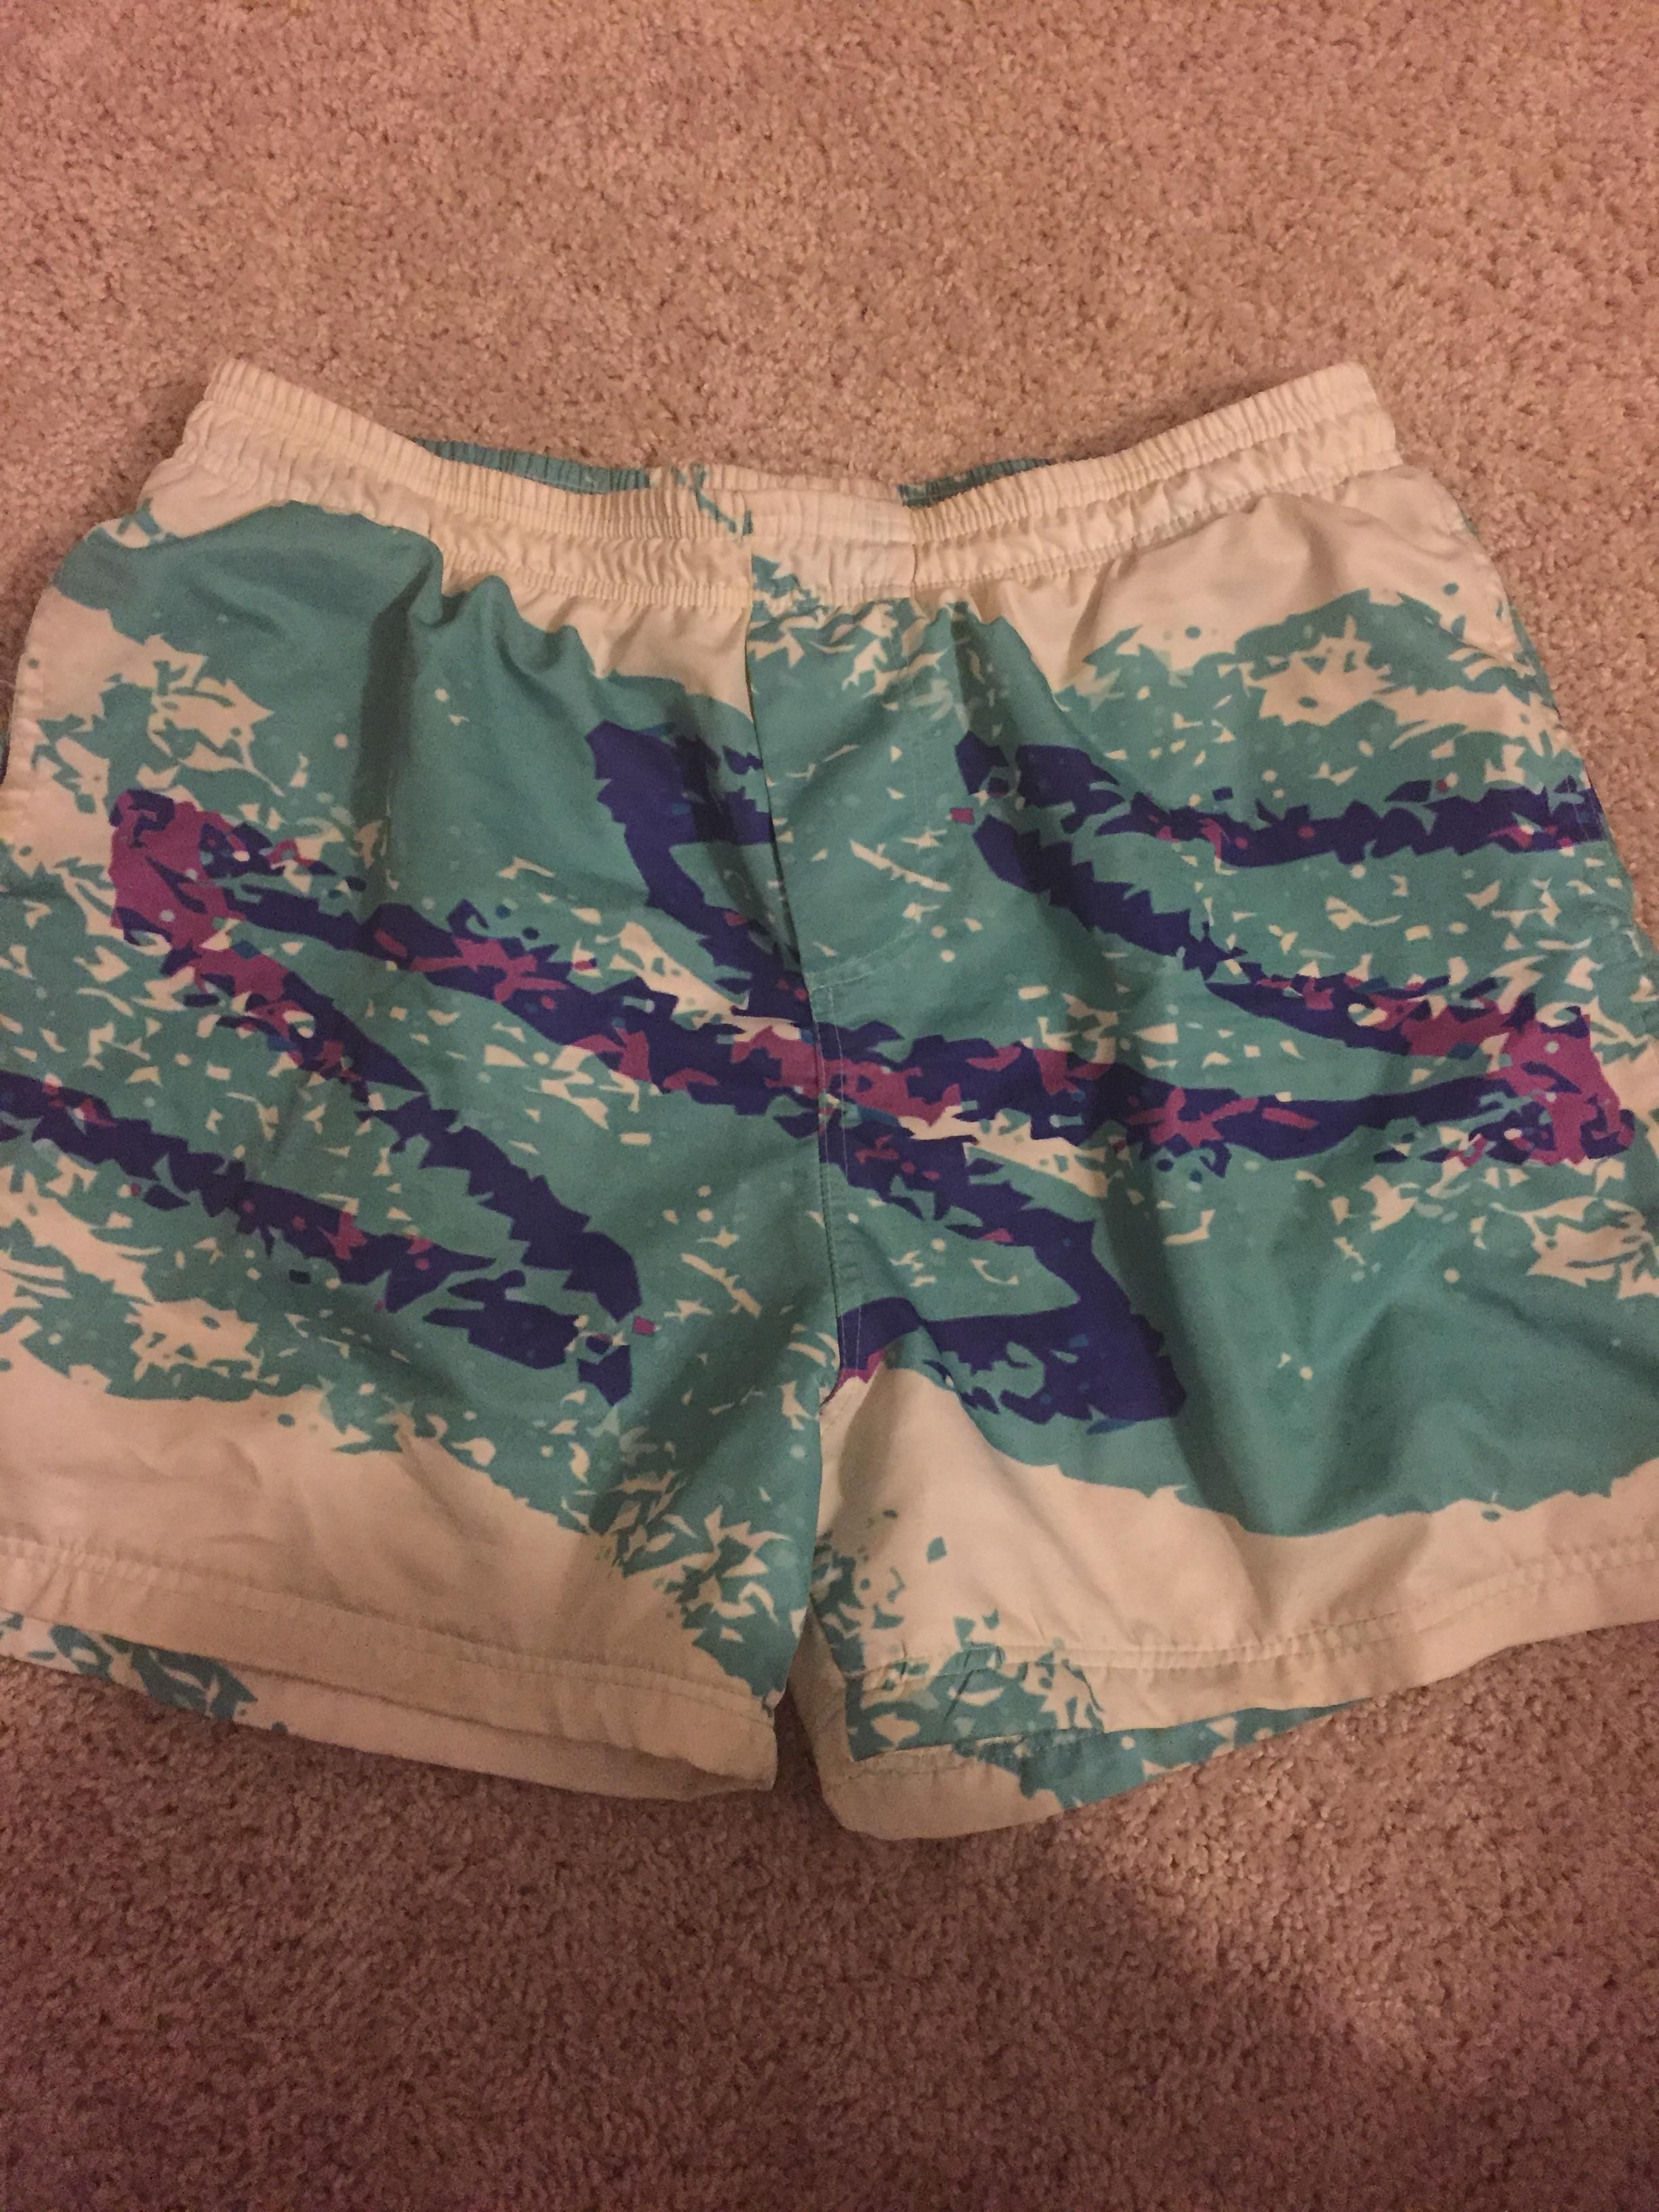 Swim suit that looks like the 90's cup.